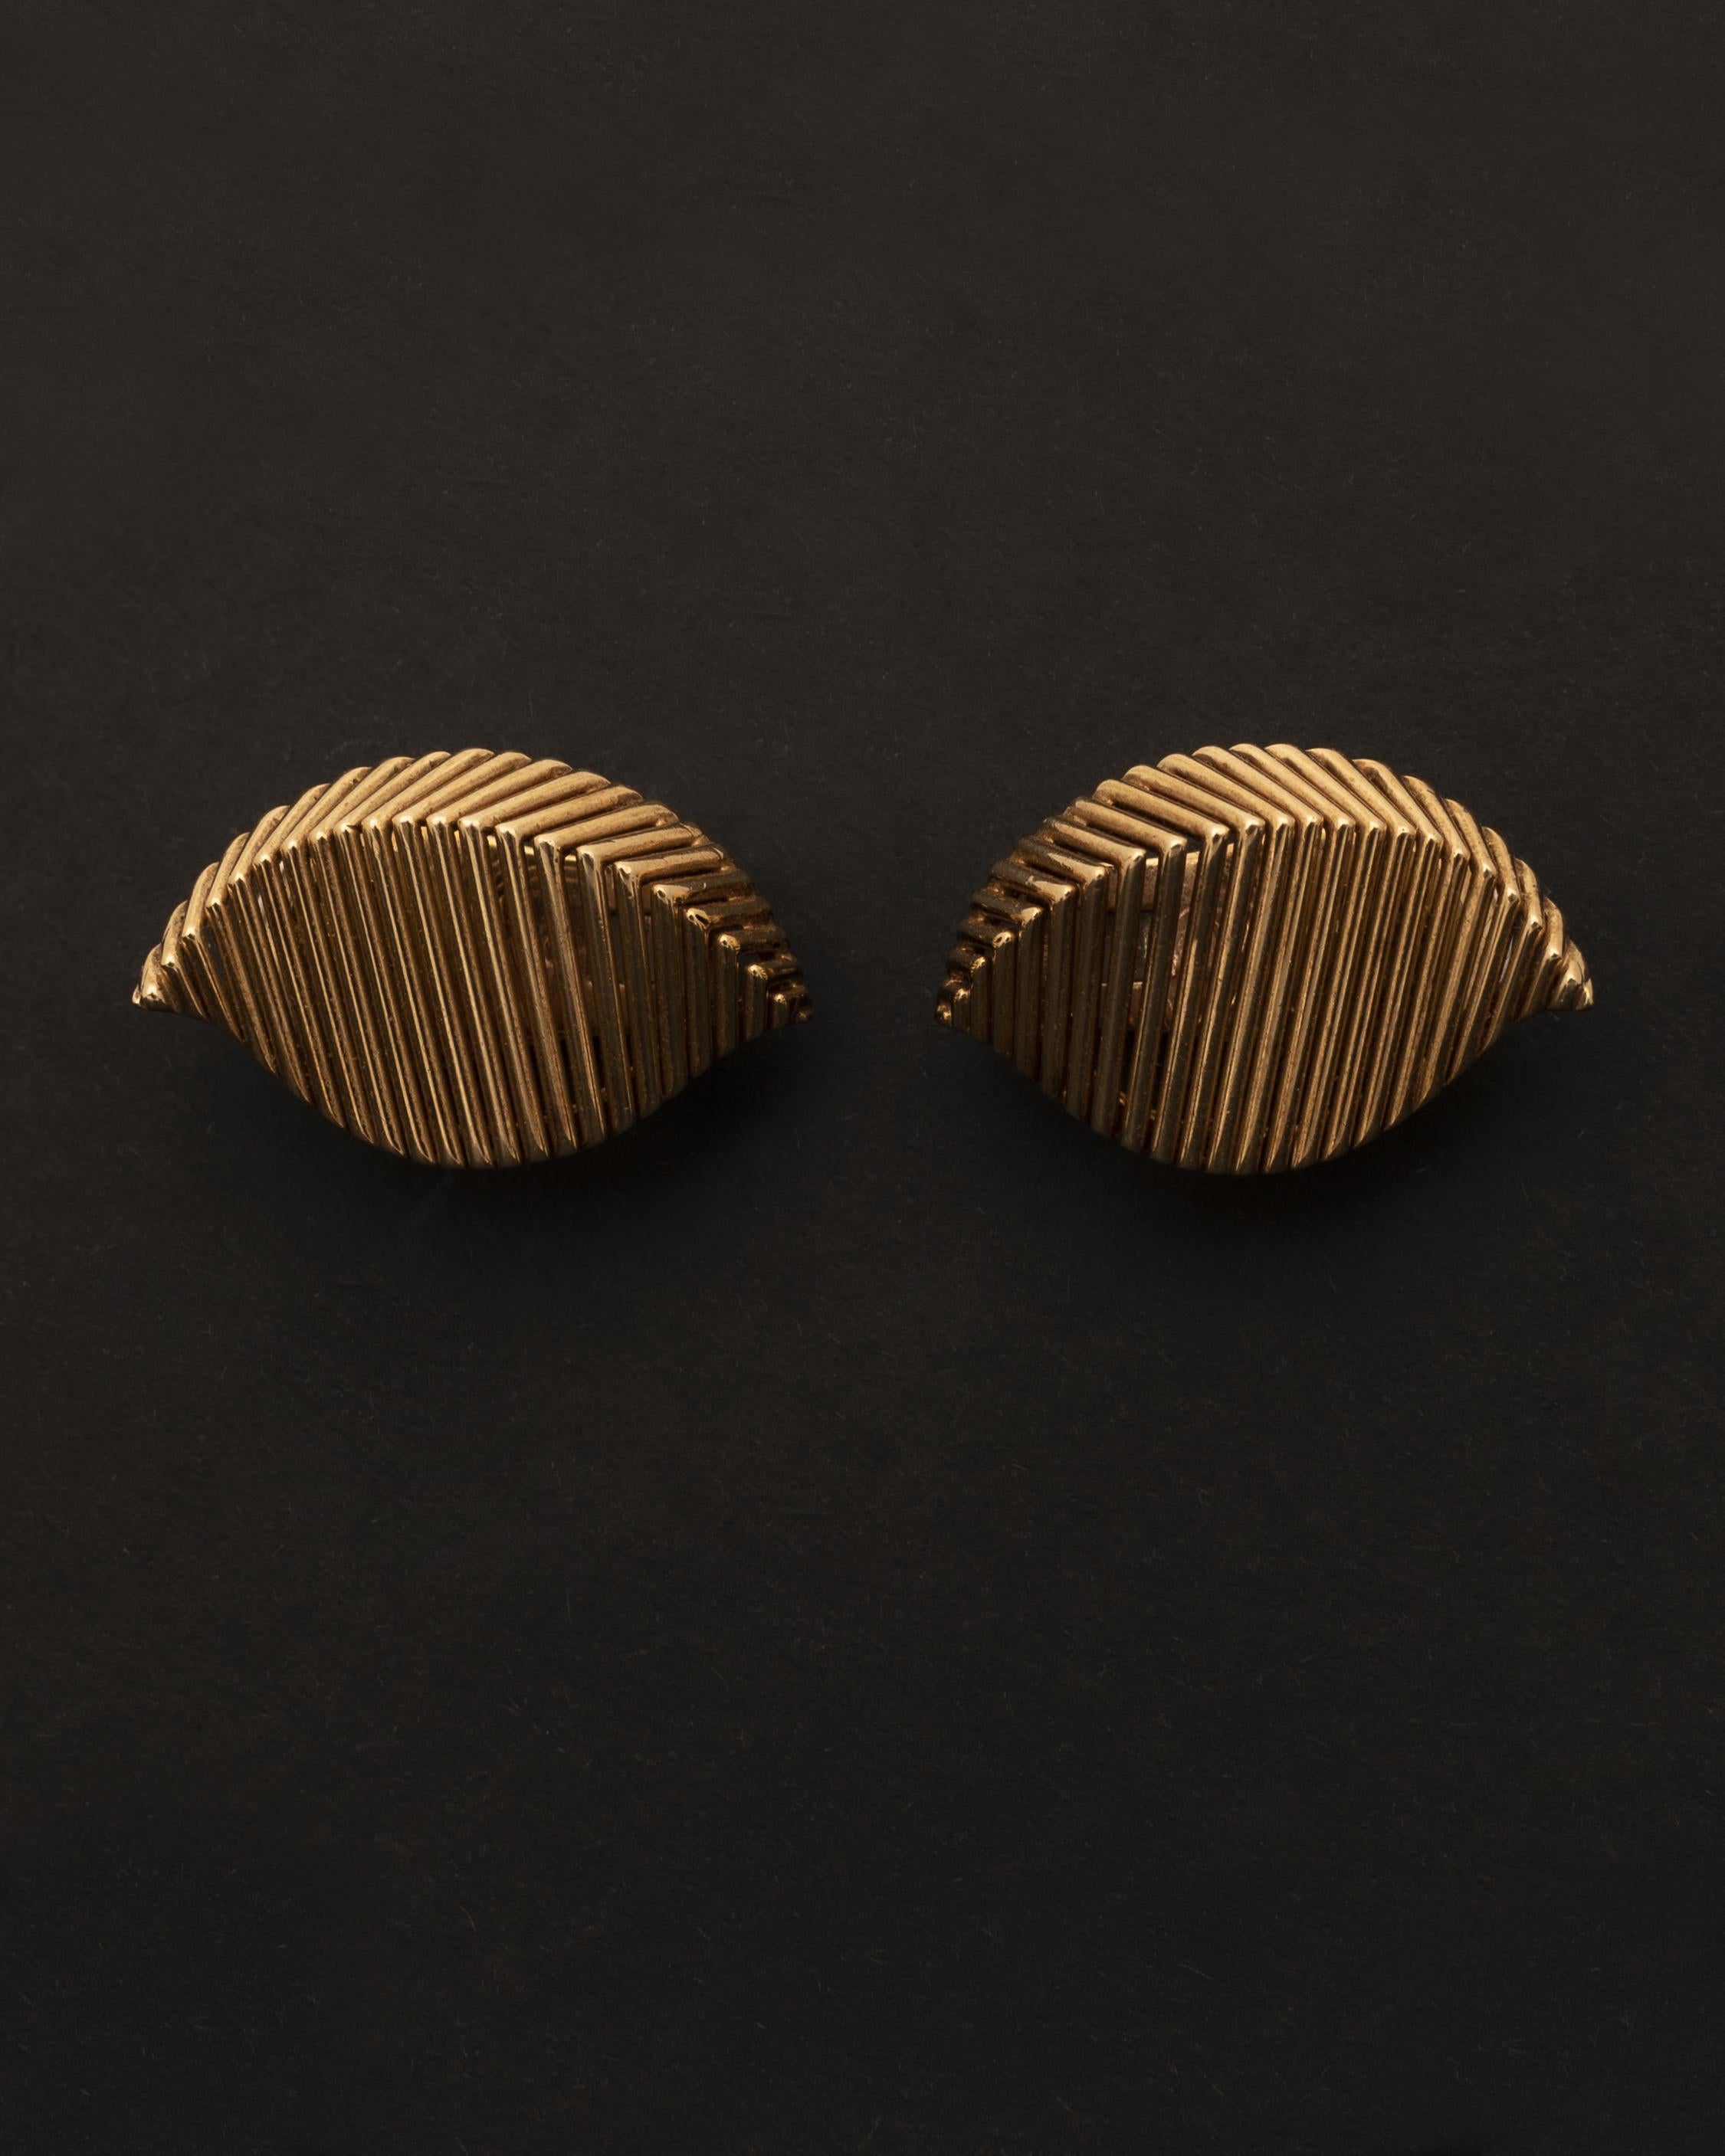 Georges Lenfant
Stunning 18k Gold Leaves Earrings, Circa 1960
Of Chevrons design, this pair of earrings are a fiercely modern work by Georges Lenfant, one of the most important workshop in Paris from the 1950 to 1980s, who worked for Hermes,